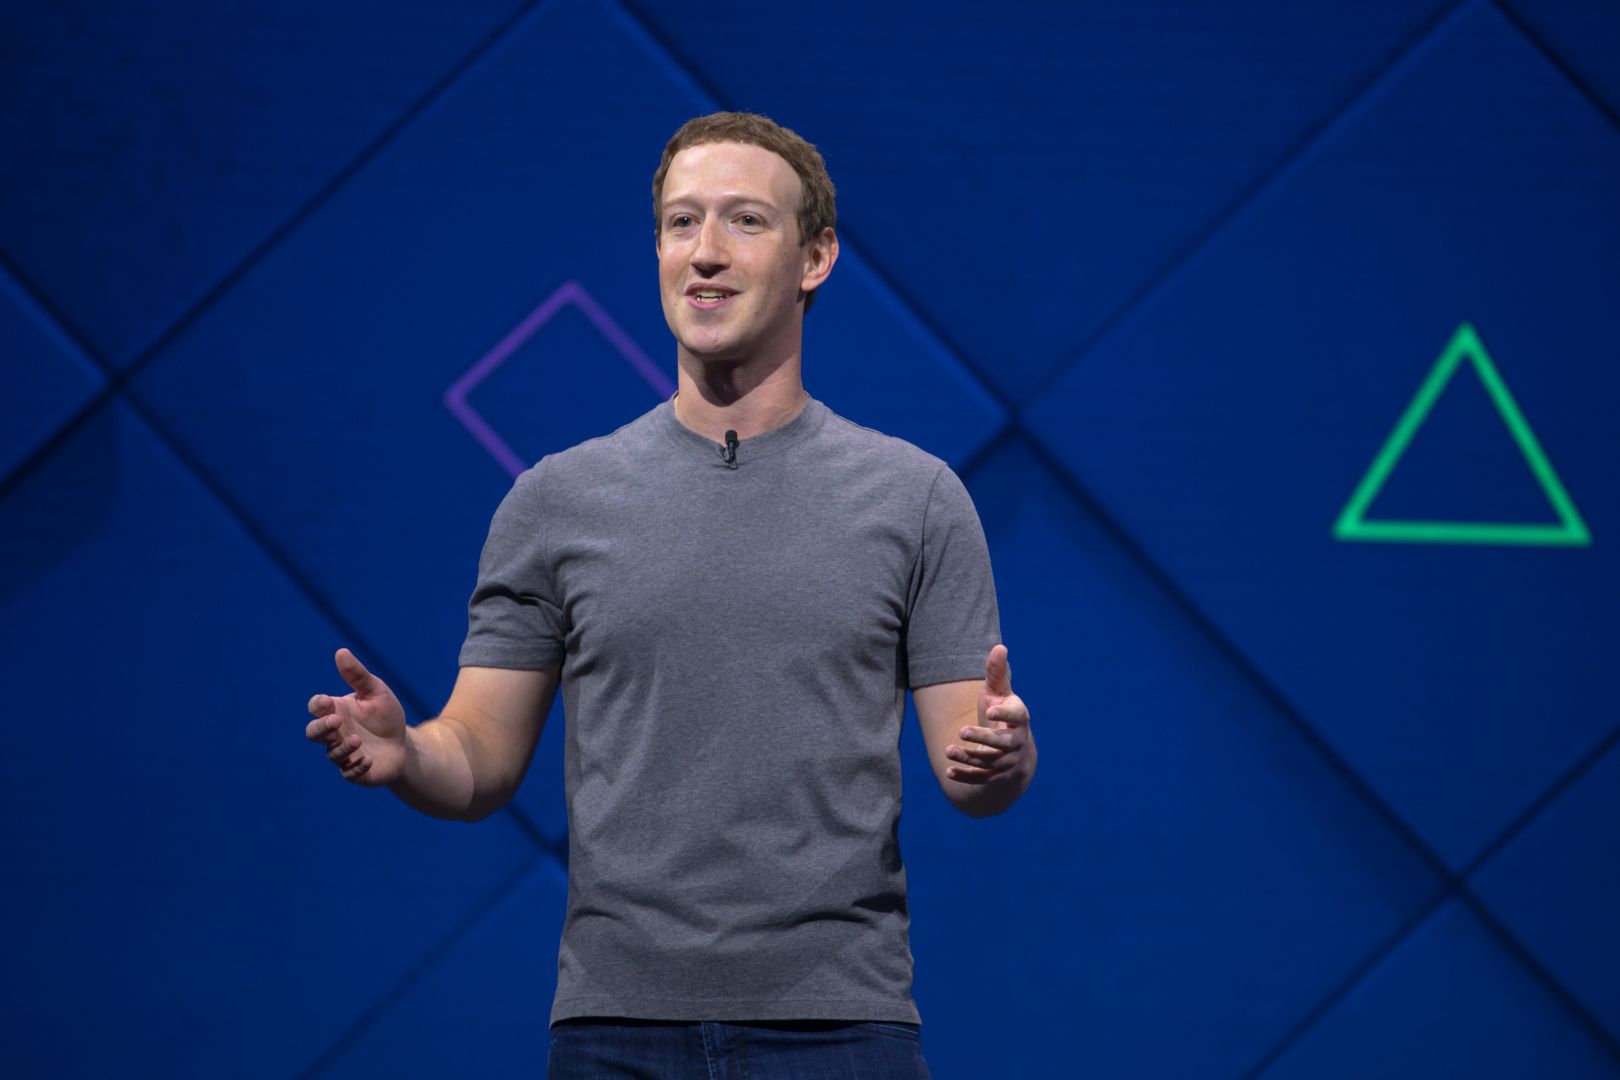 Analysts predict Facebook's Q2 2019 earnings report